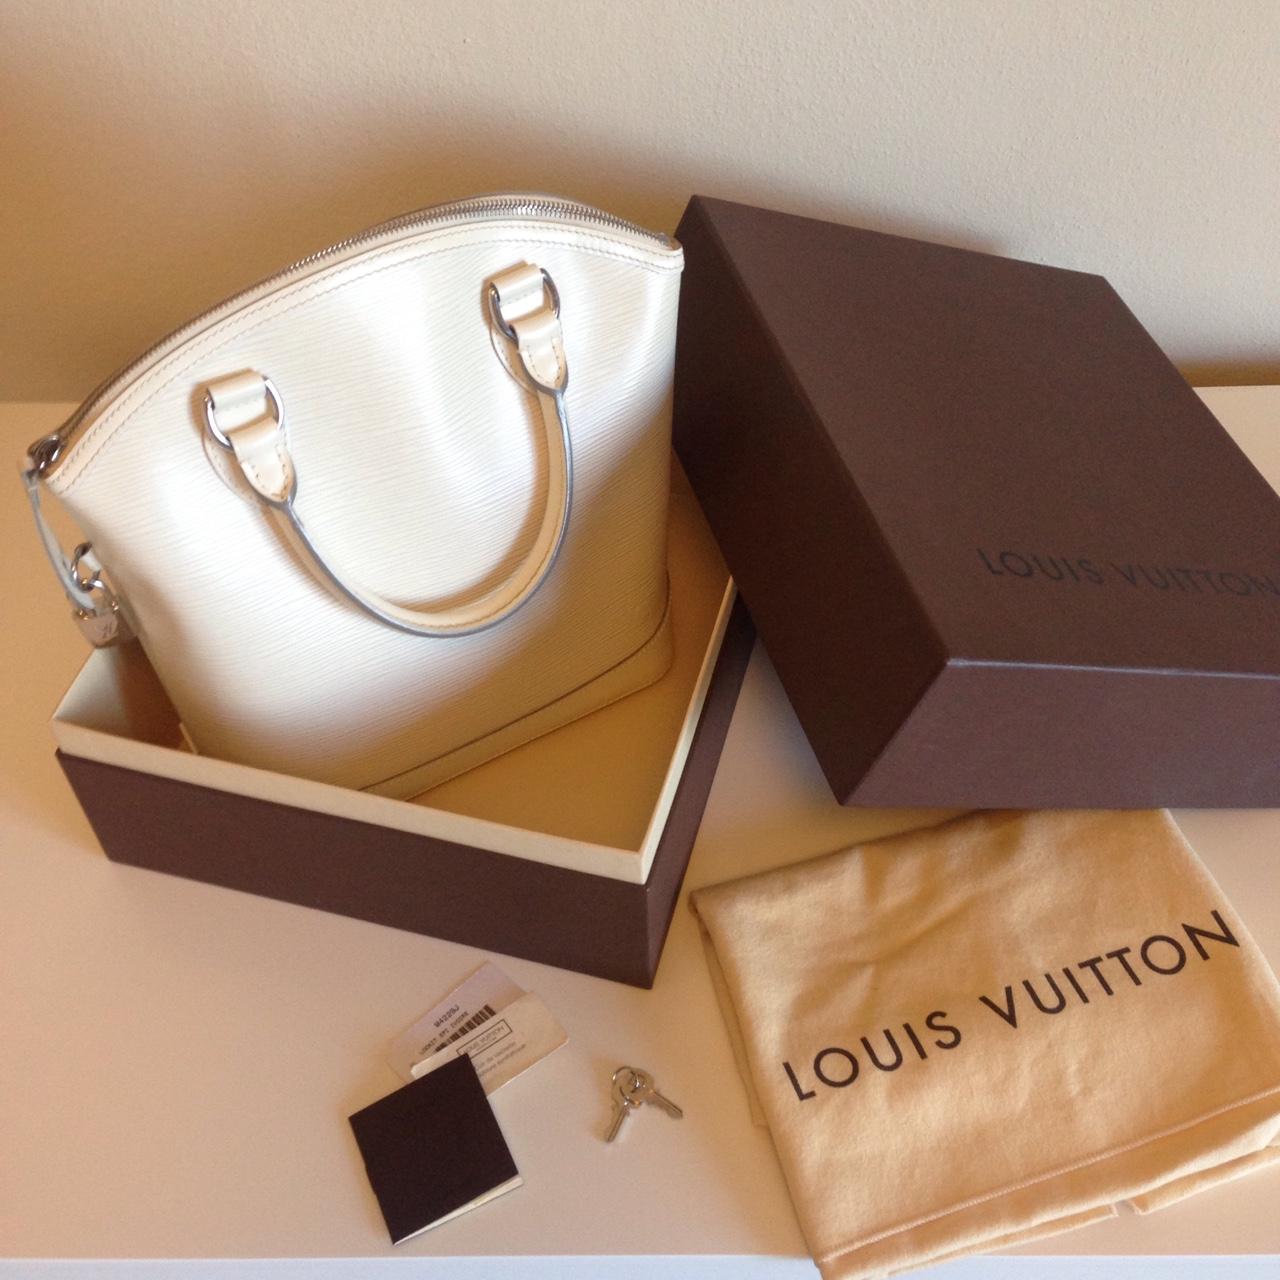 Used once, authentic genuine Louis Vuitton Jasmin - Depop